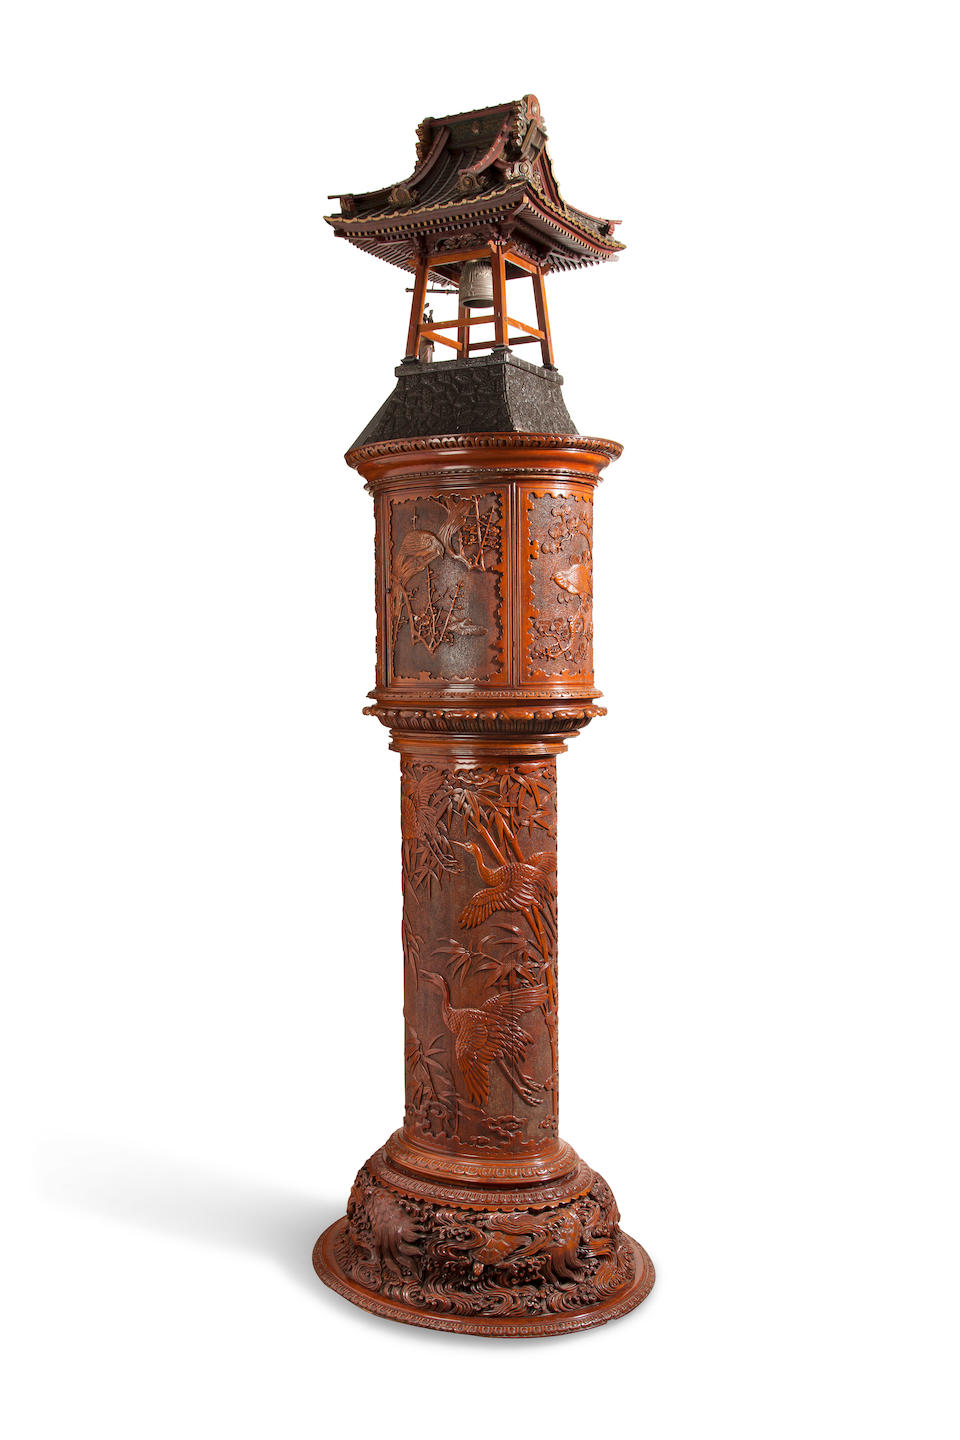 A Remarkable elaborately carved and inlaid automaton striking hall clock Commissioned from Tiffany & Co., New York, the case Japanese, fitted with Tiffany movement No. 759, delivered in April 1901